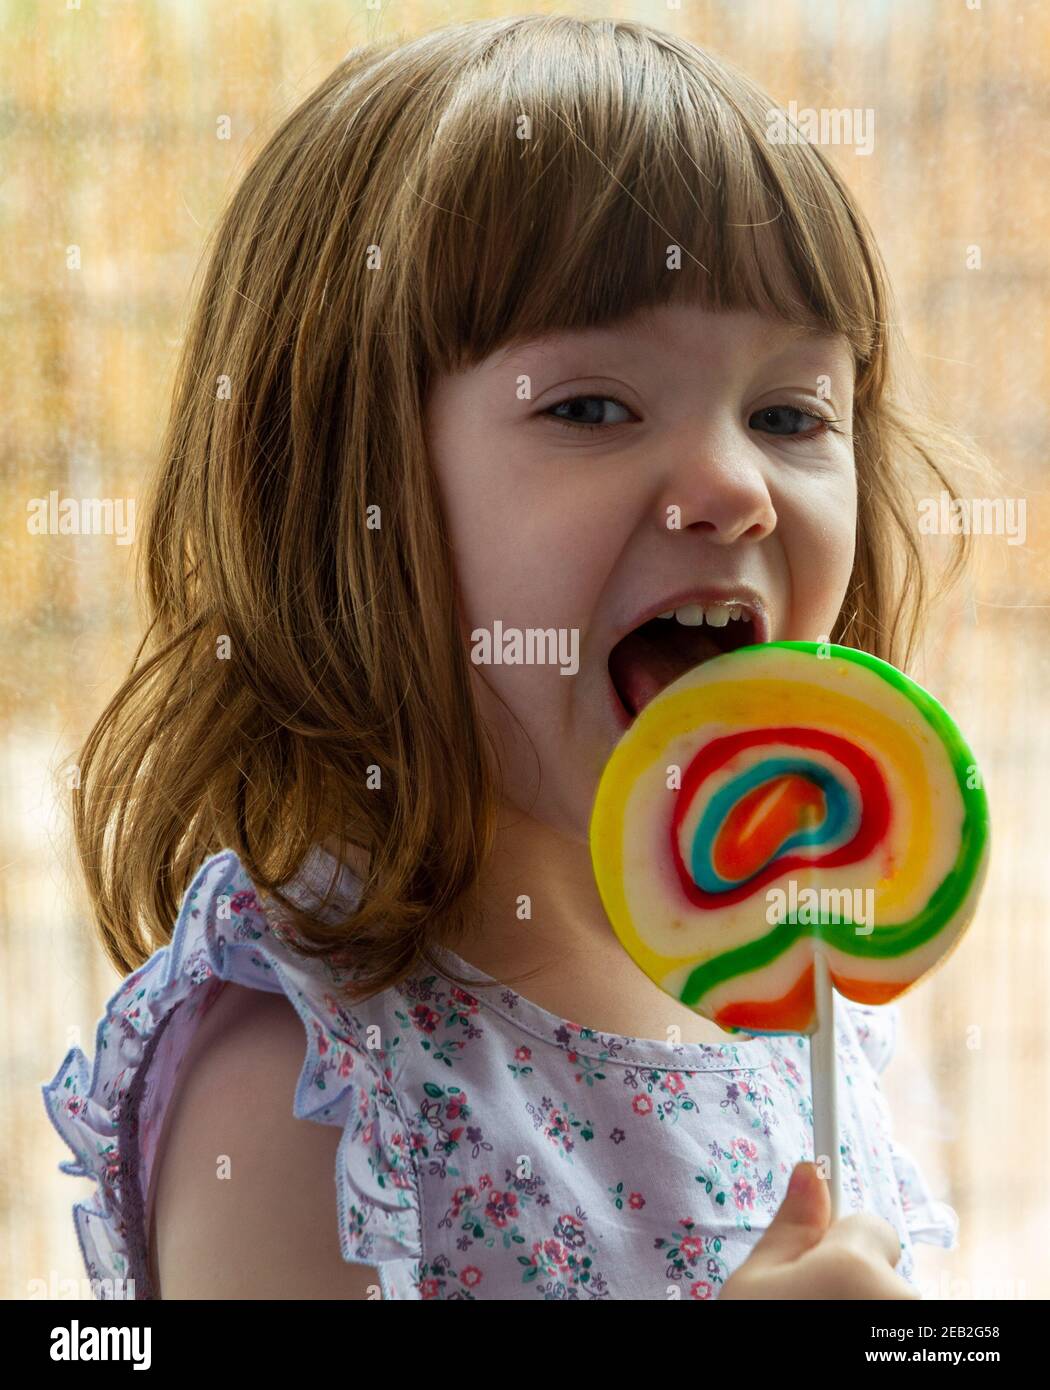 Portrait of a cute, brown-haired, blue-eyed girl licking a colourful lollipop by a window Stock Photo